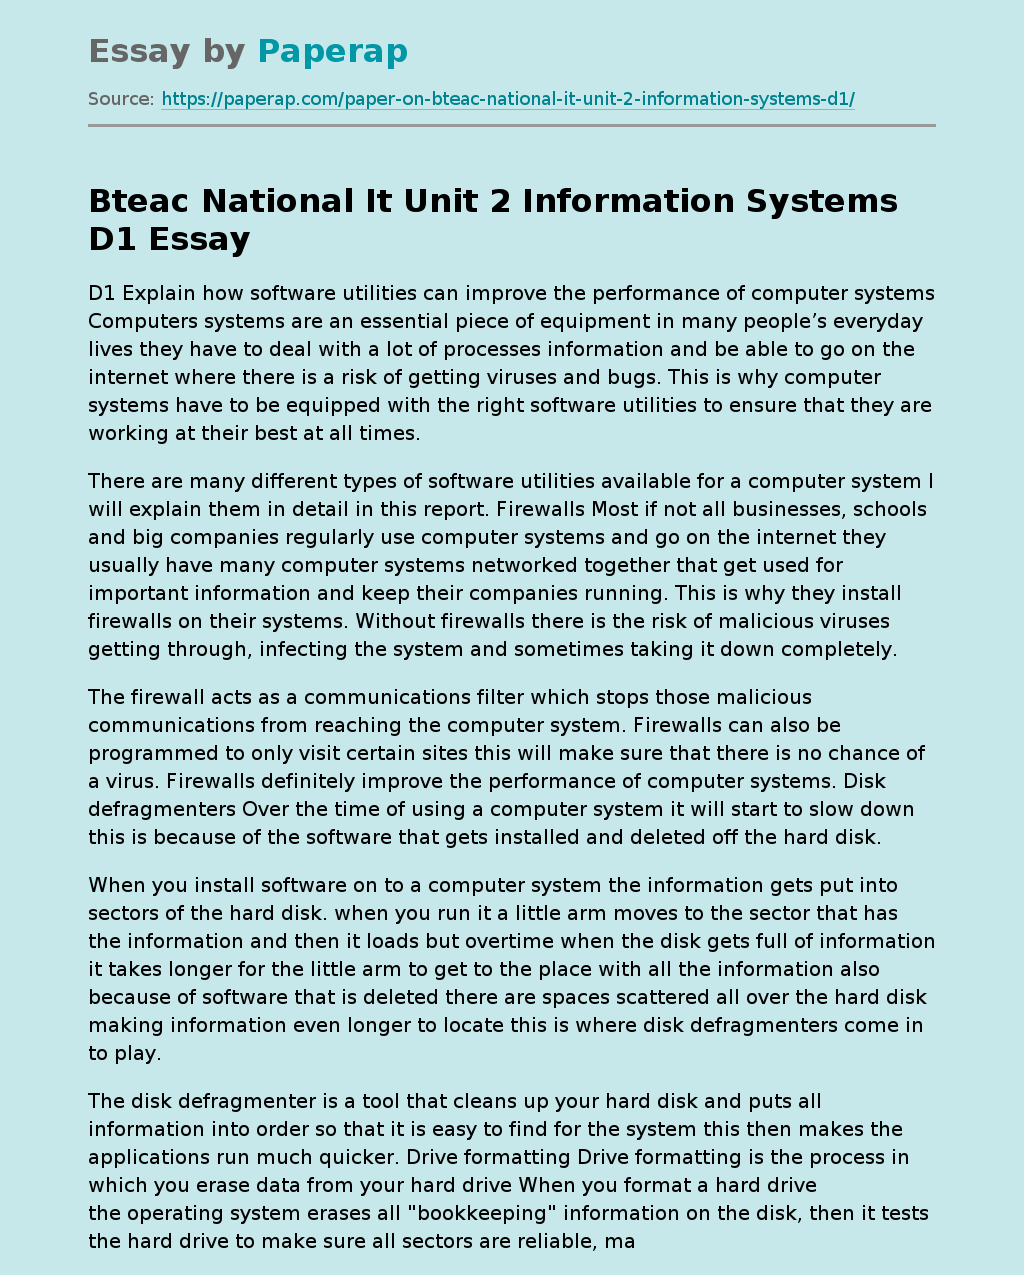 Bteac National It Unit 2 Information Systems D1